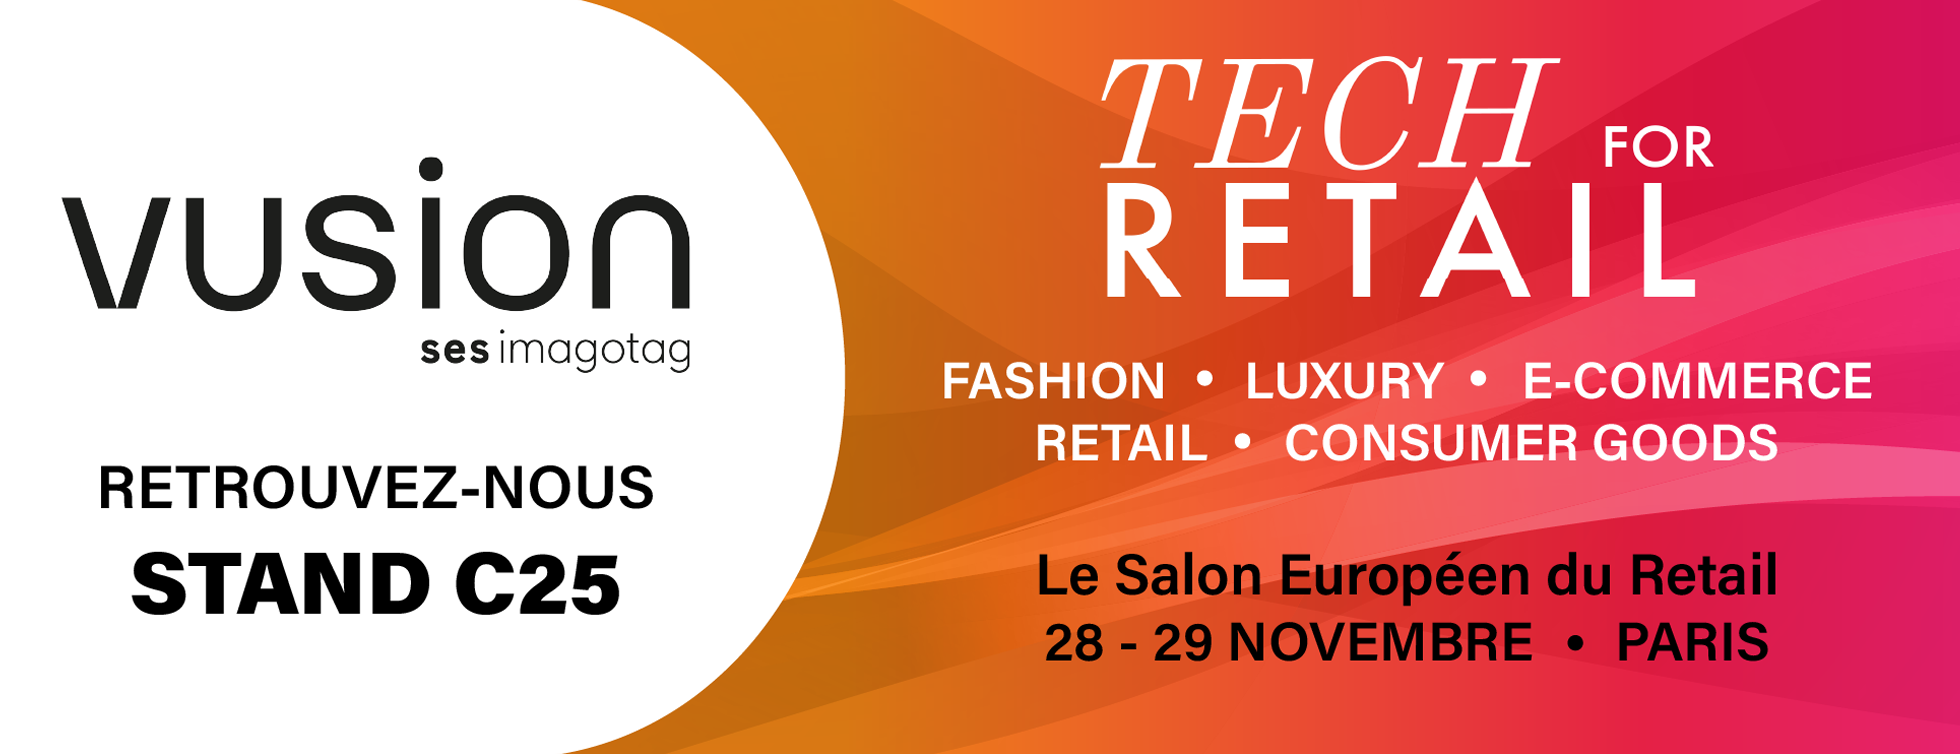 Join us at Tech For Retail